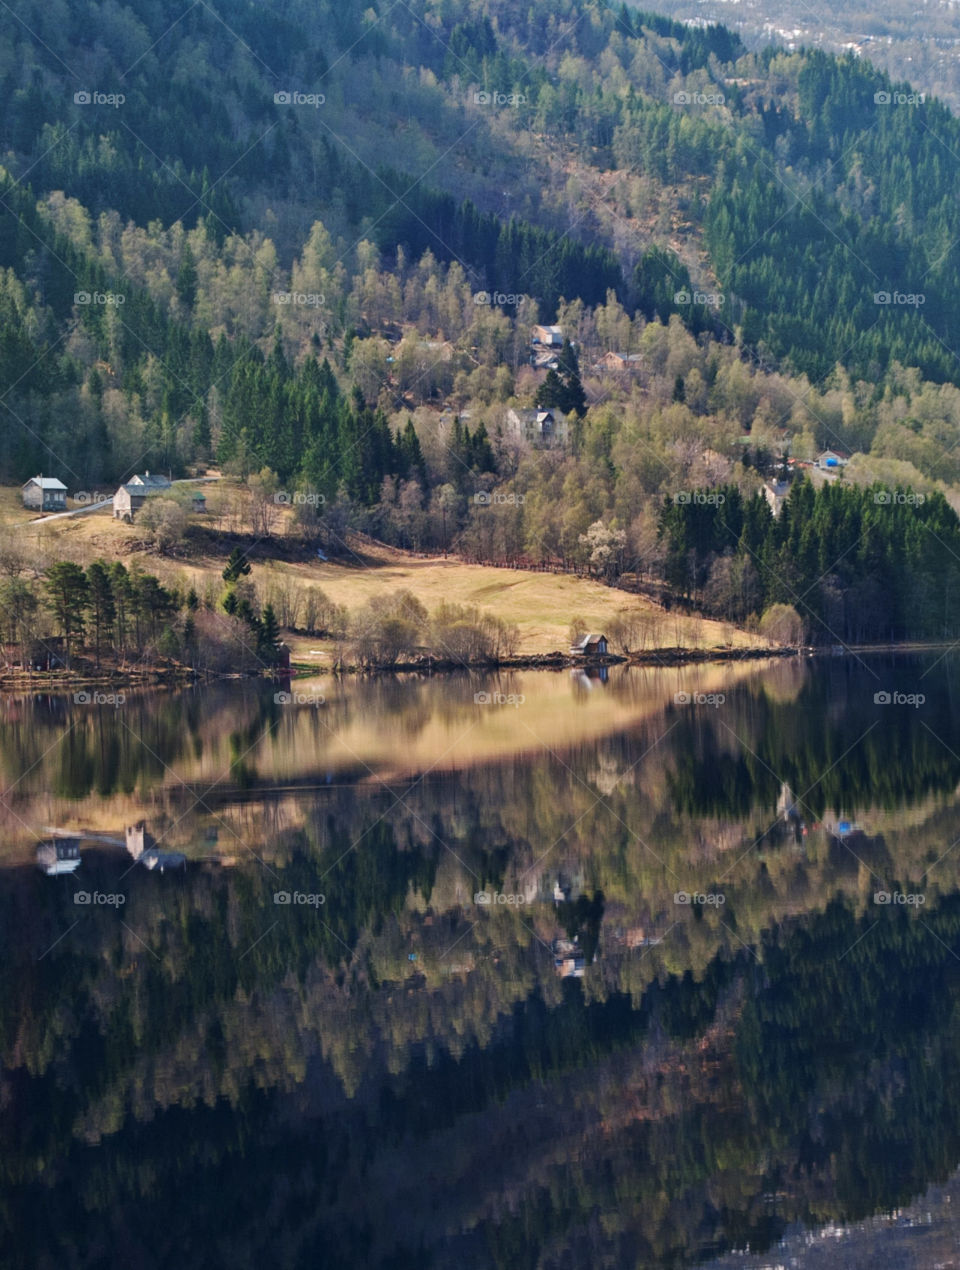 Landscape reflection photograph, taken in beautiful Flam in Norway. 